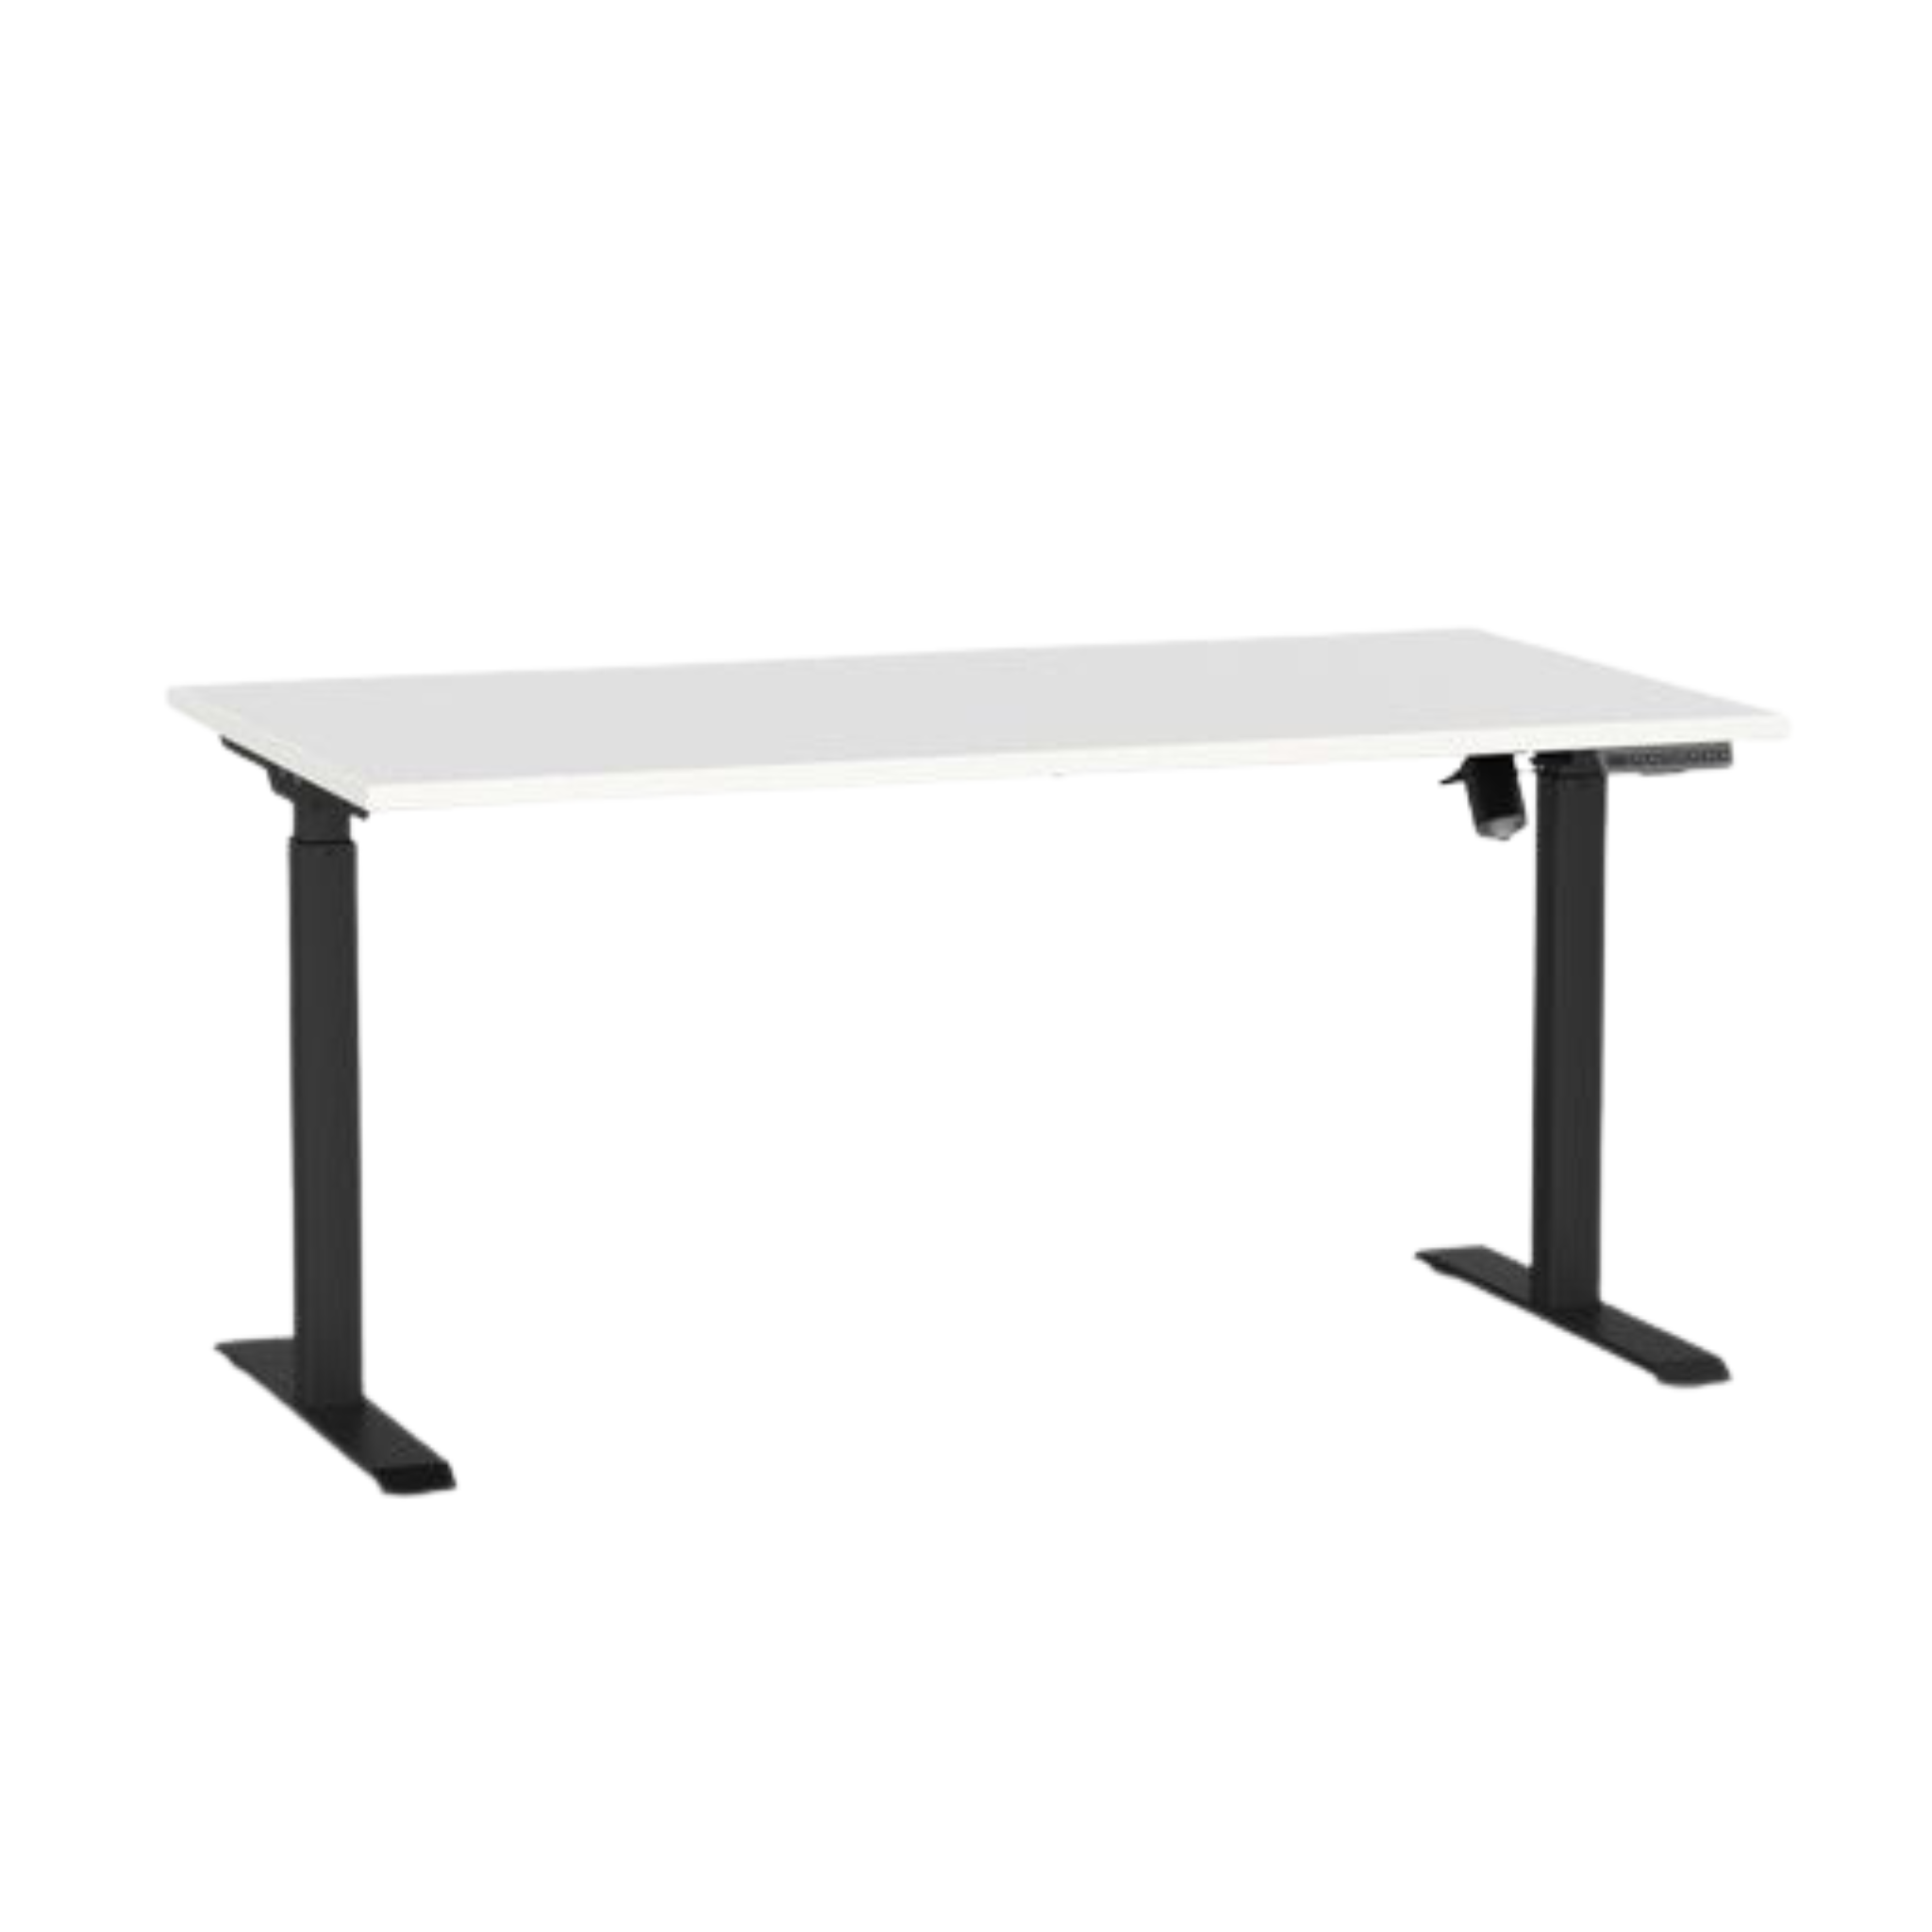 Agile boost electric sit to stand desk with black frame and white top